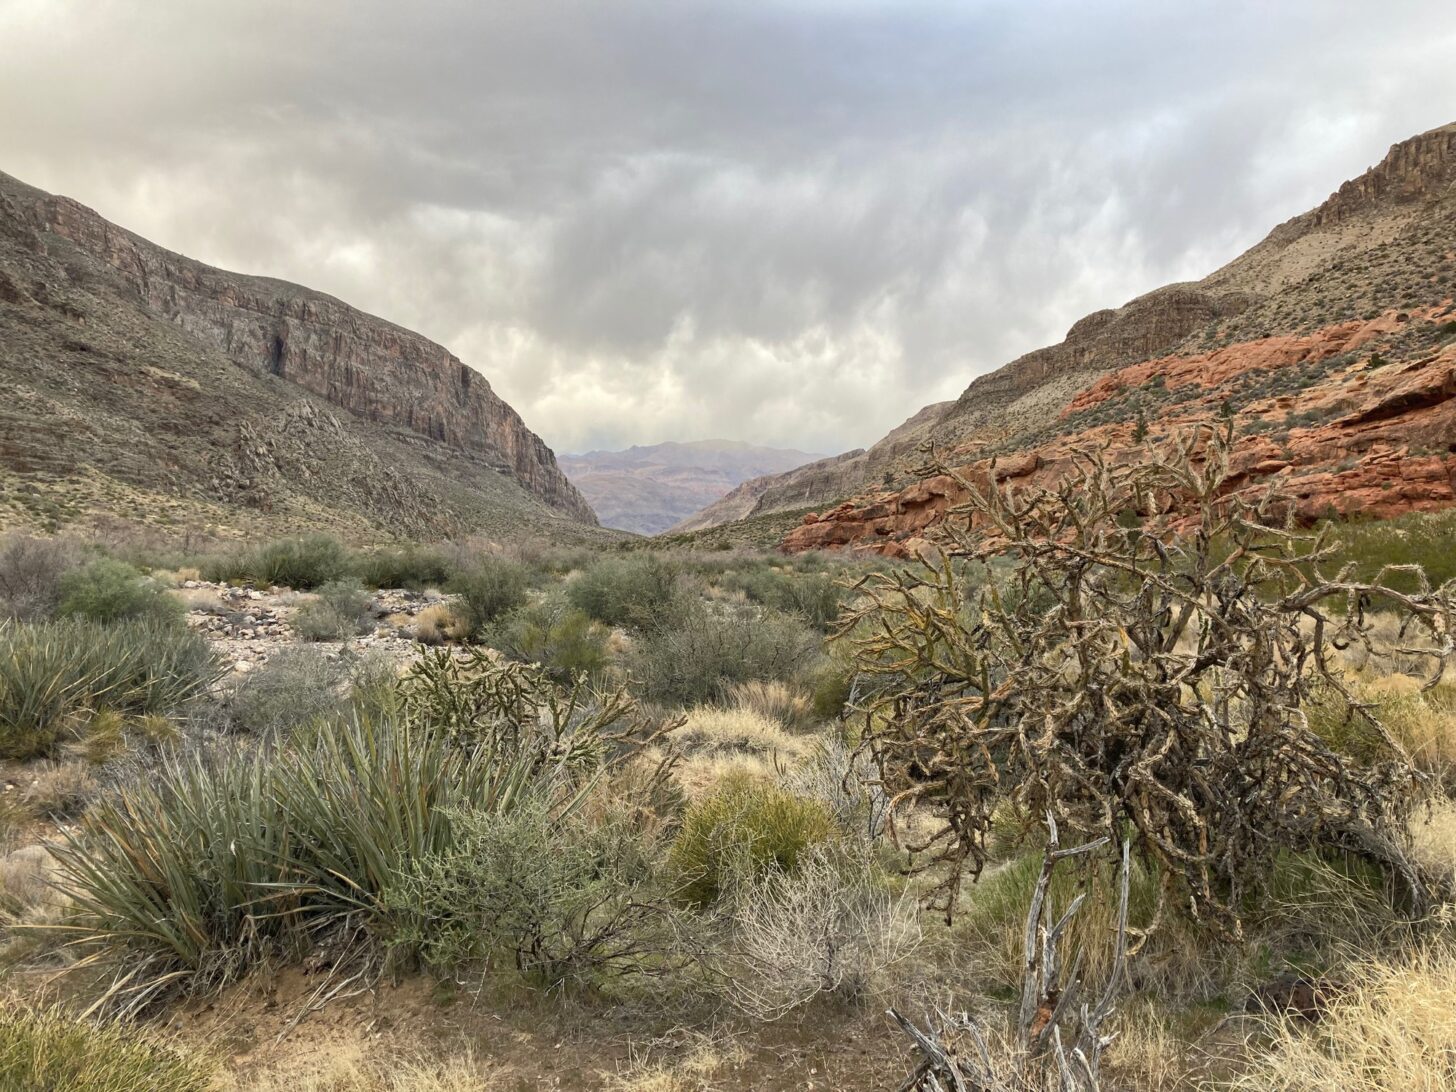 a moody sky hangs over a wide canyon with reddish cliffs.